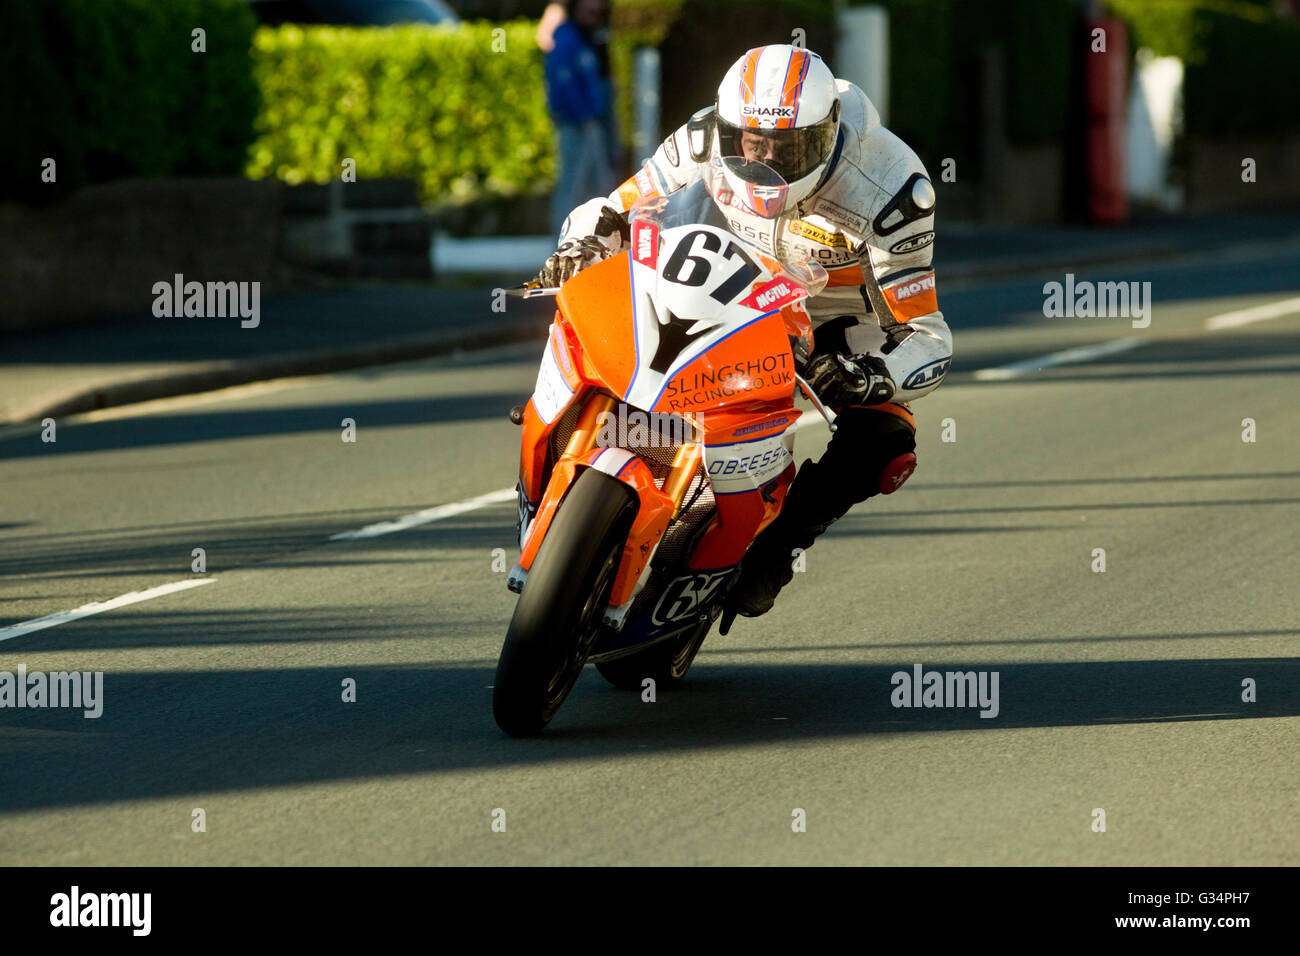 Isle of Man TT race 2016 BMW Superstock motorbike number 67 ridden by David Hewson, sponsered by Obsession Engineering, on Brae Hill at 180 mph. Monday 6th June 2016. Stock Photo